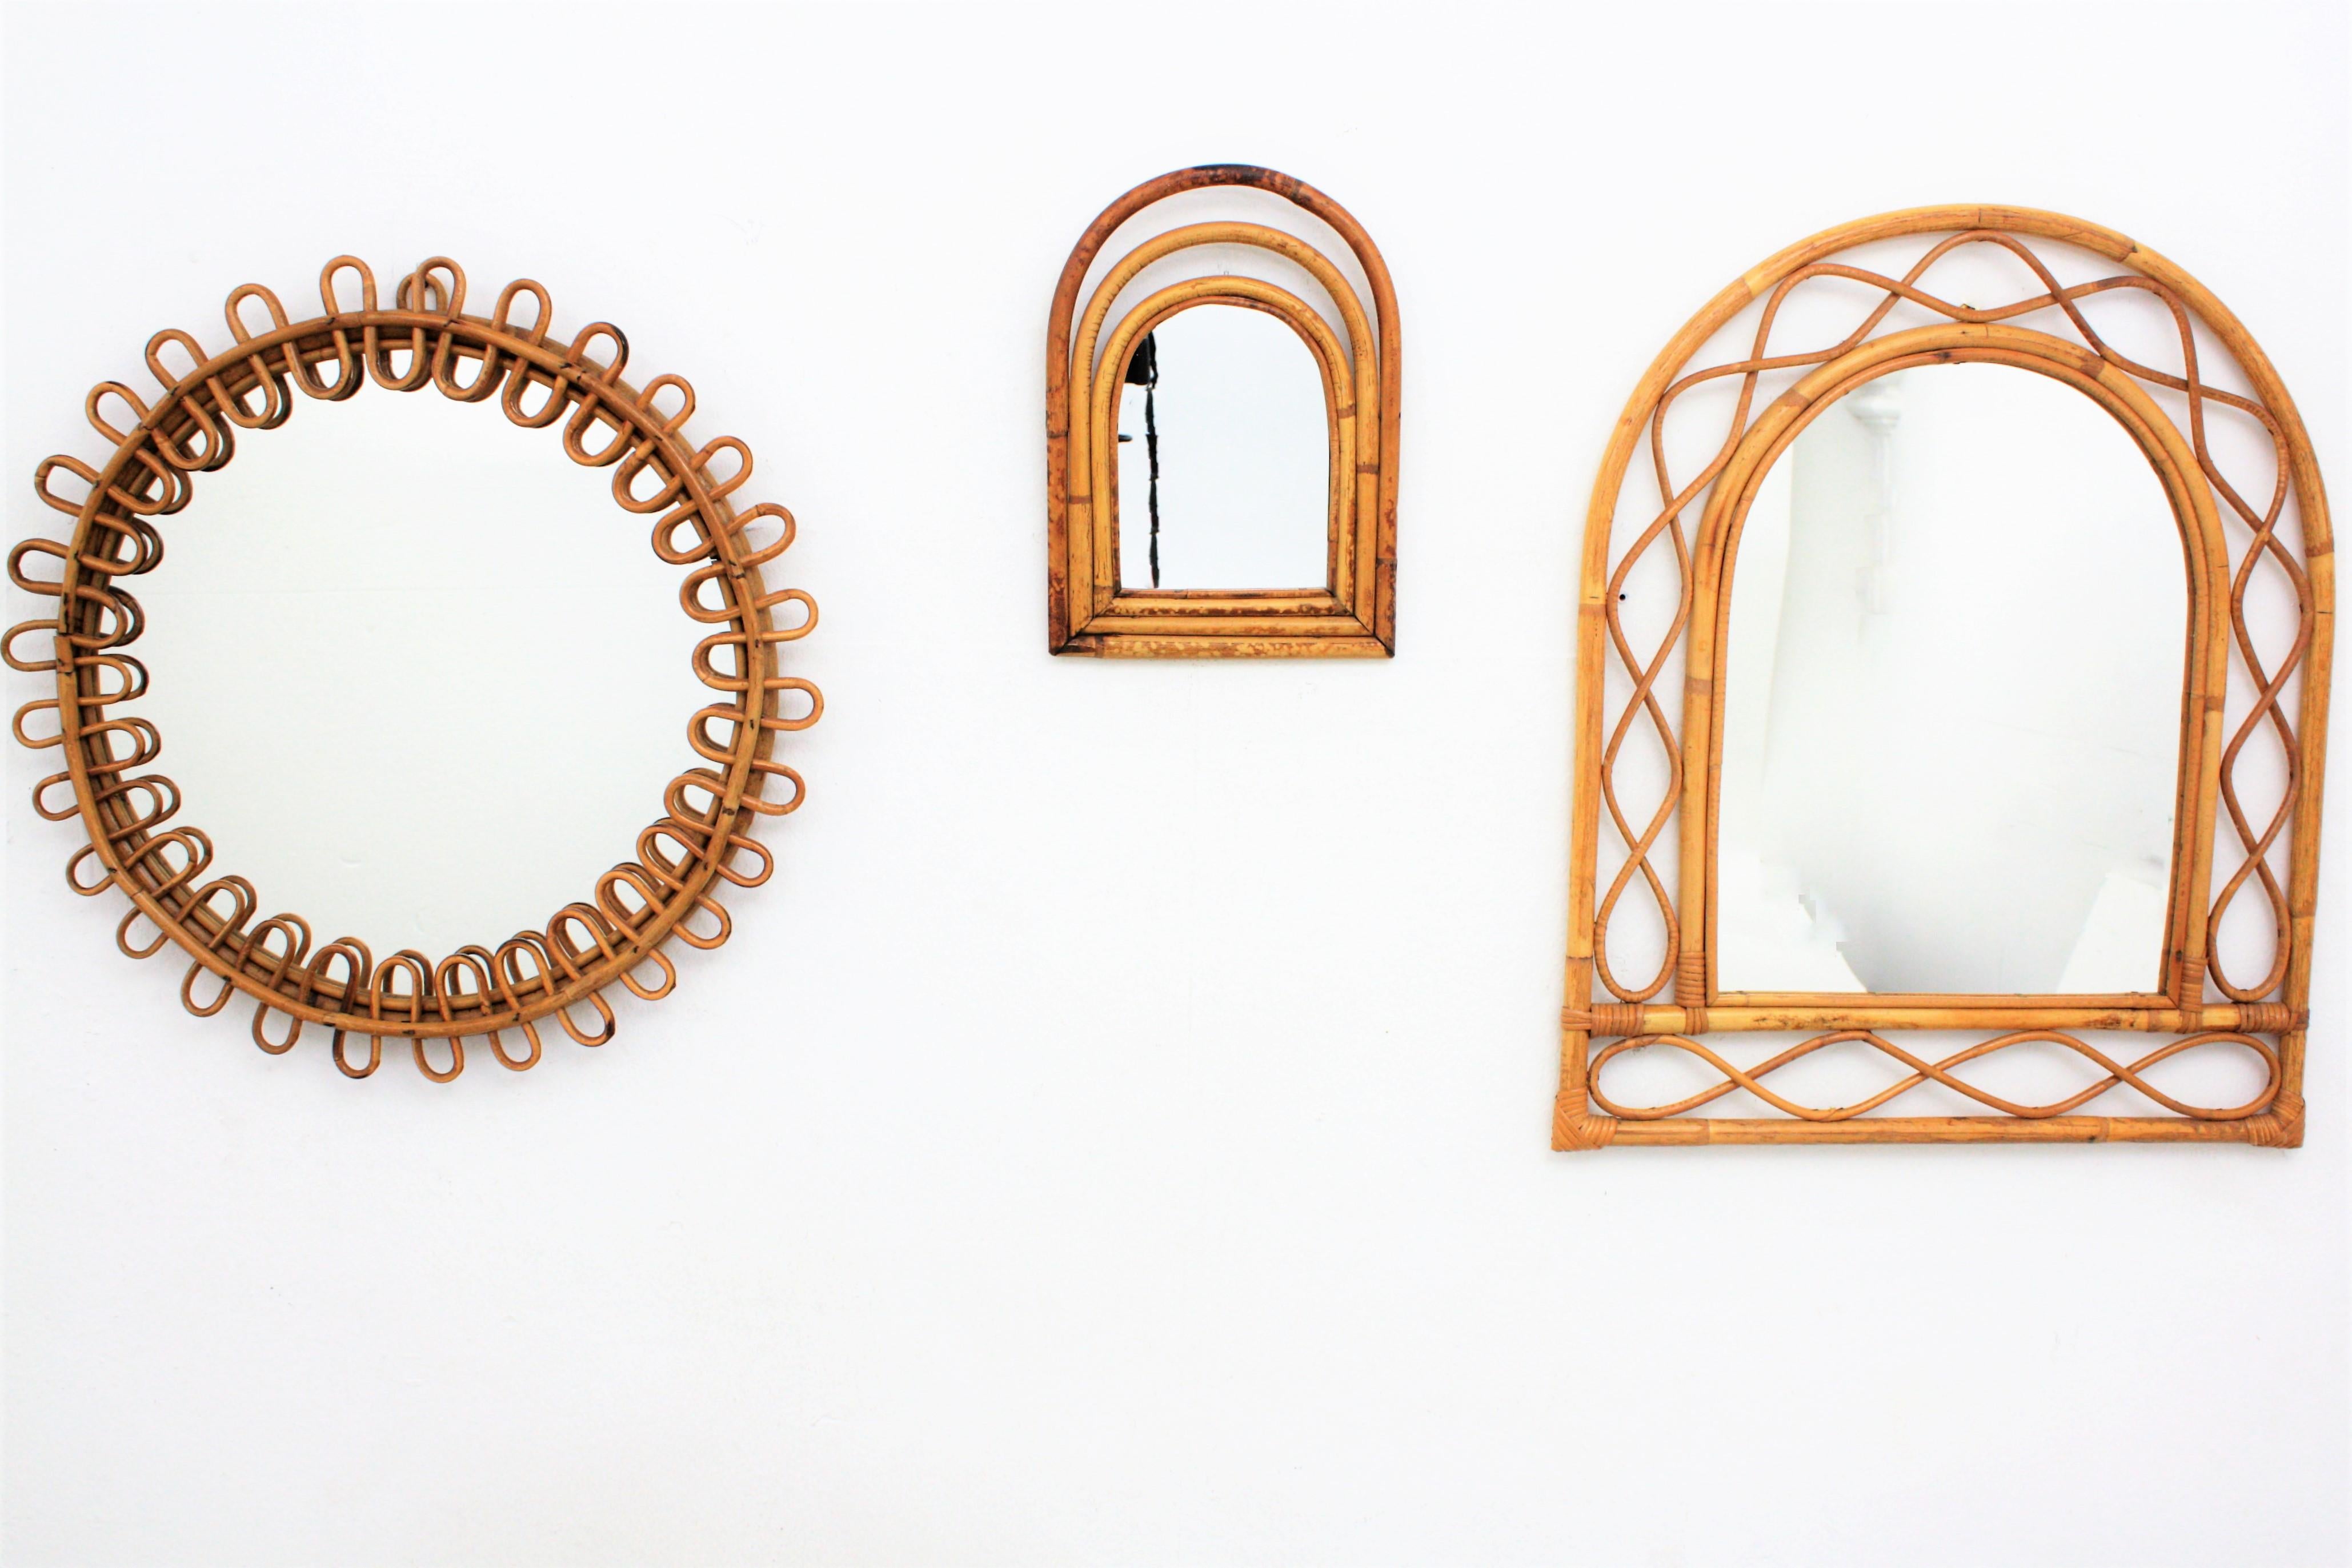 Midcentury handcrafted bamboo mirror with arched top in the style of Franco Albini.  Italy, 1960s.
This mirror is unusual due to its size and it has all the taste of the Mediterranean taste. It is perfect to place it alone or mixed with other cane